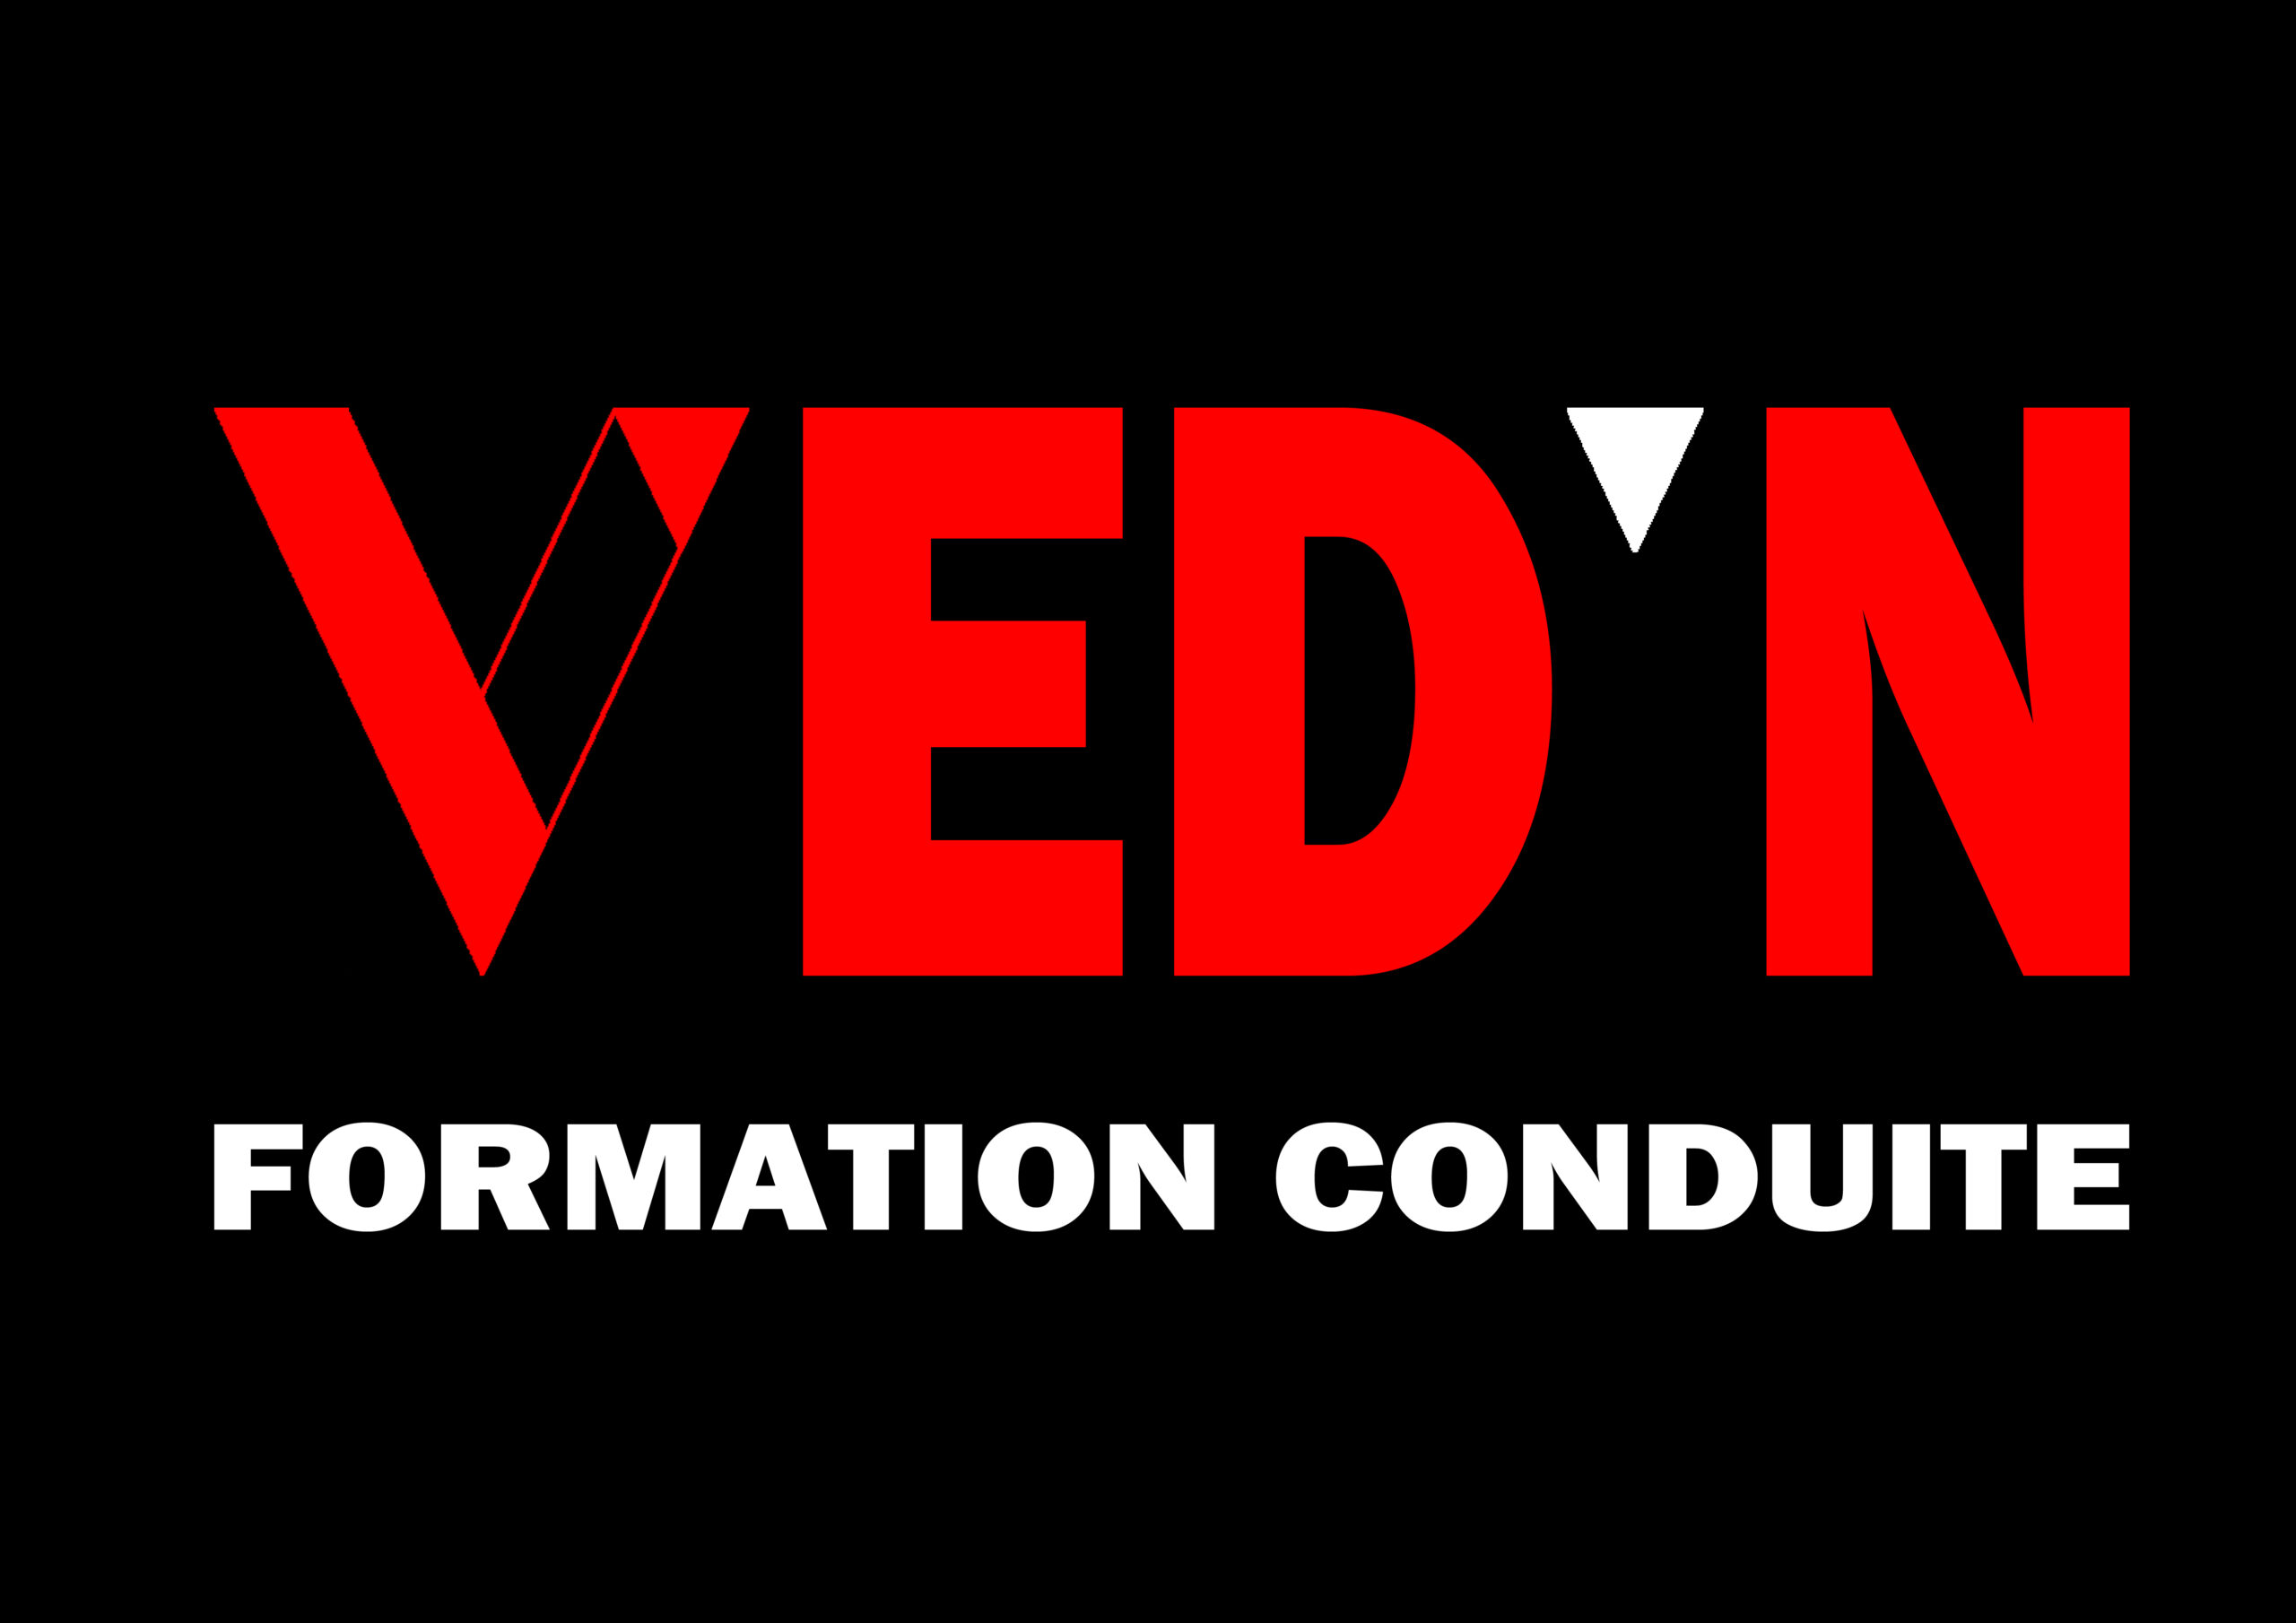 VED'N FORMATION CONDUITE